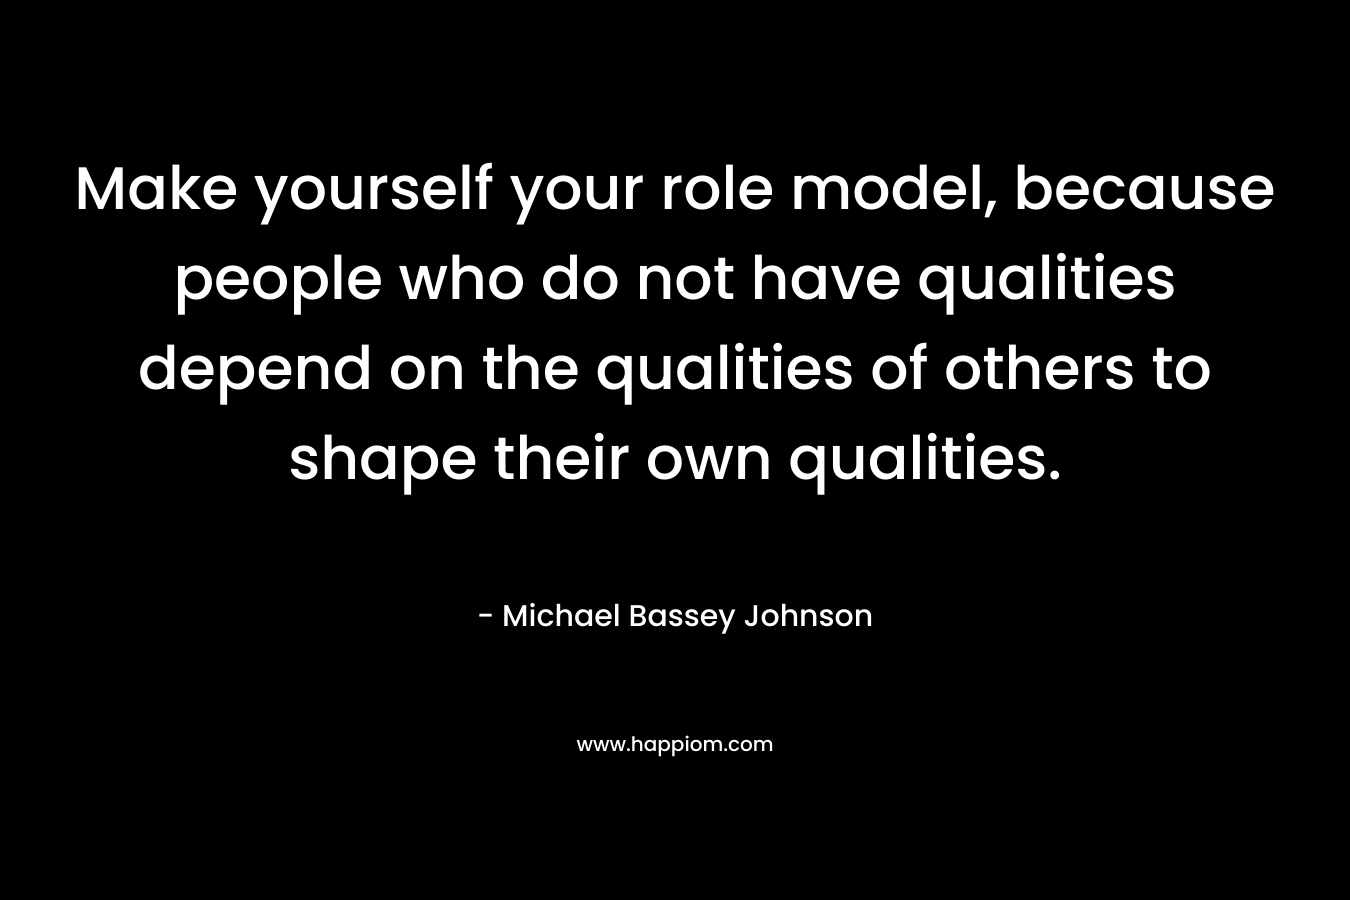 Make yourself your role model, because people who do not have qualities depend on the qualities of others to shape their own qualities.